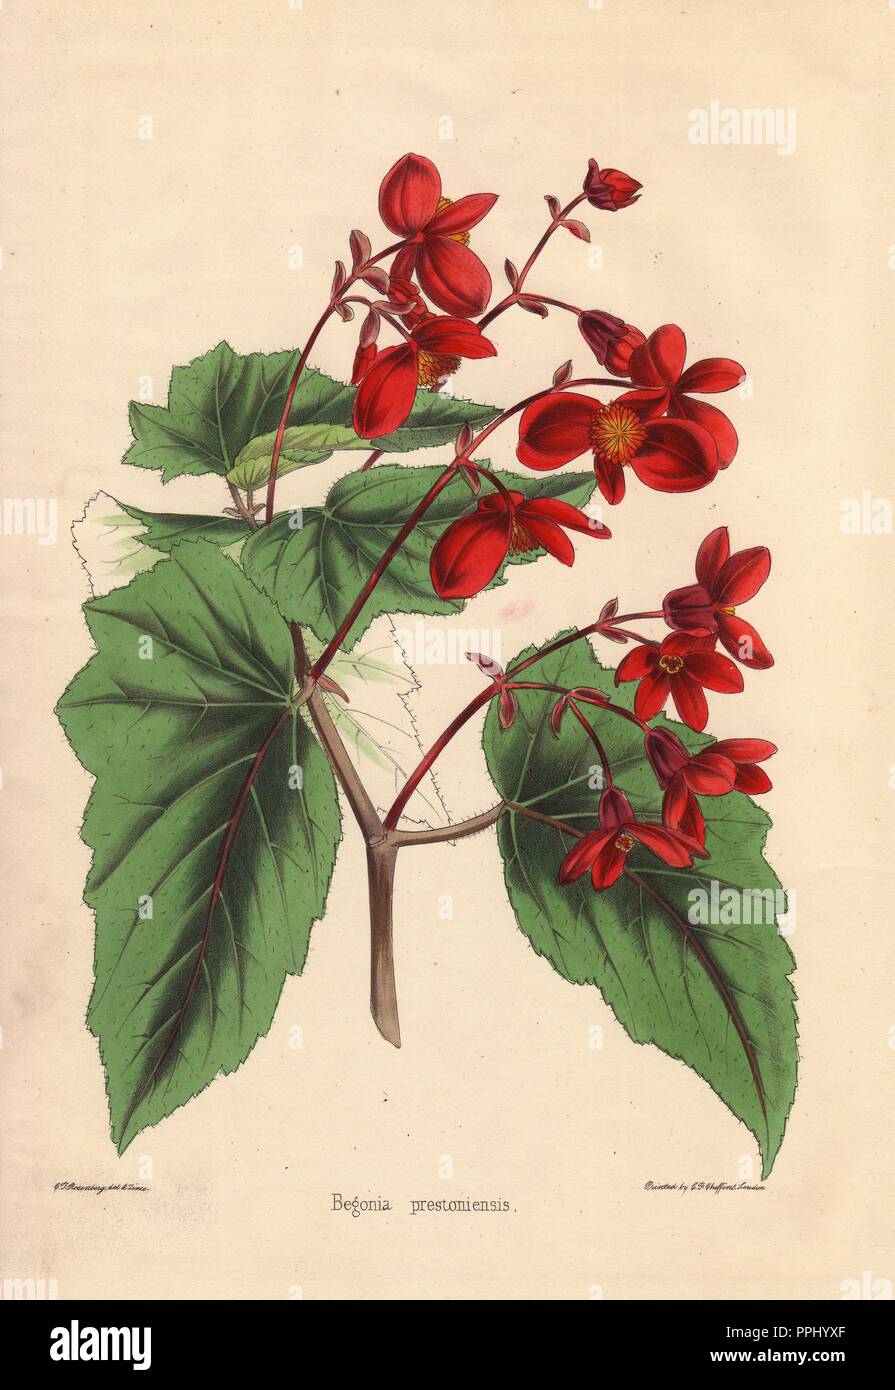 Begonia prestoniensis with crimson flowers. Drawn and zincographed by C. T. Rosenberg, for Thomas Moore's 'The Garden Companion and Florists' Guide,' 1852, published by Charles Frederick Cheffins.. . C.T. Rosenberg drew and engraved many botanicals for Moore's 'The Gardener's Magazine of Botany' and W.J. Hooker's 'Curtis's Botanical Magazine' in the middle of the 19th century. Moore (1821-1887) was the curator of the Botanic Garden, Chelsea, from 1847 until his death. Stock Photo